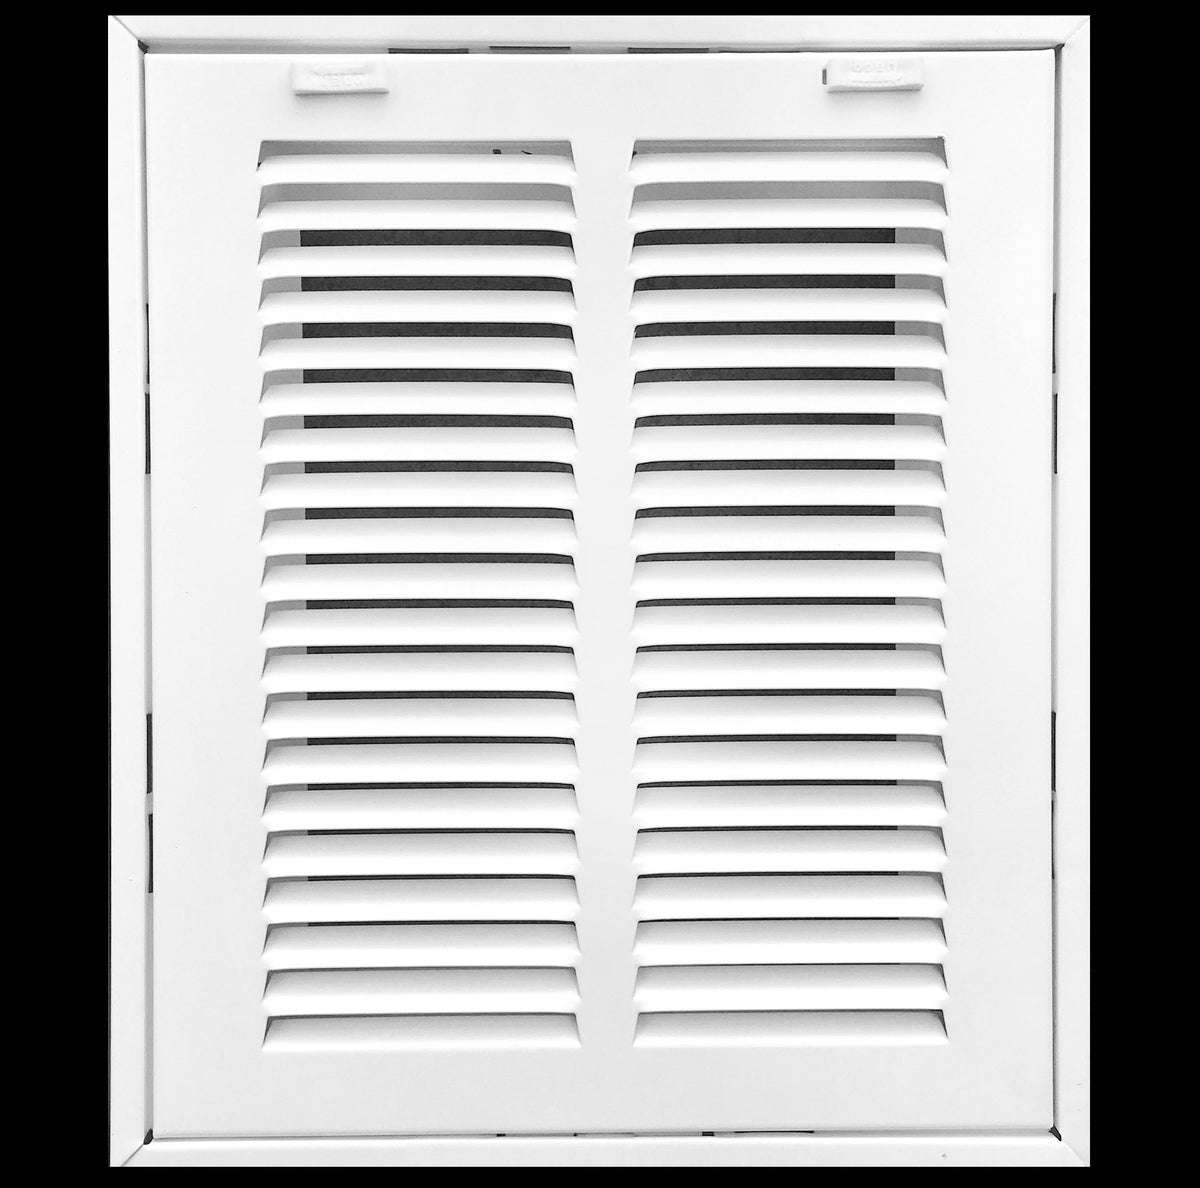 8&quot; X 12&quot; Steel Return Air Filter Grille for 1&quot; Filter - Removable Frame - [Outer Dimensions: 10 5/8&quot; X 14 5/8&quot;]